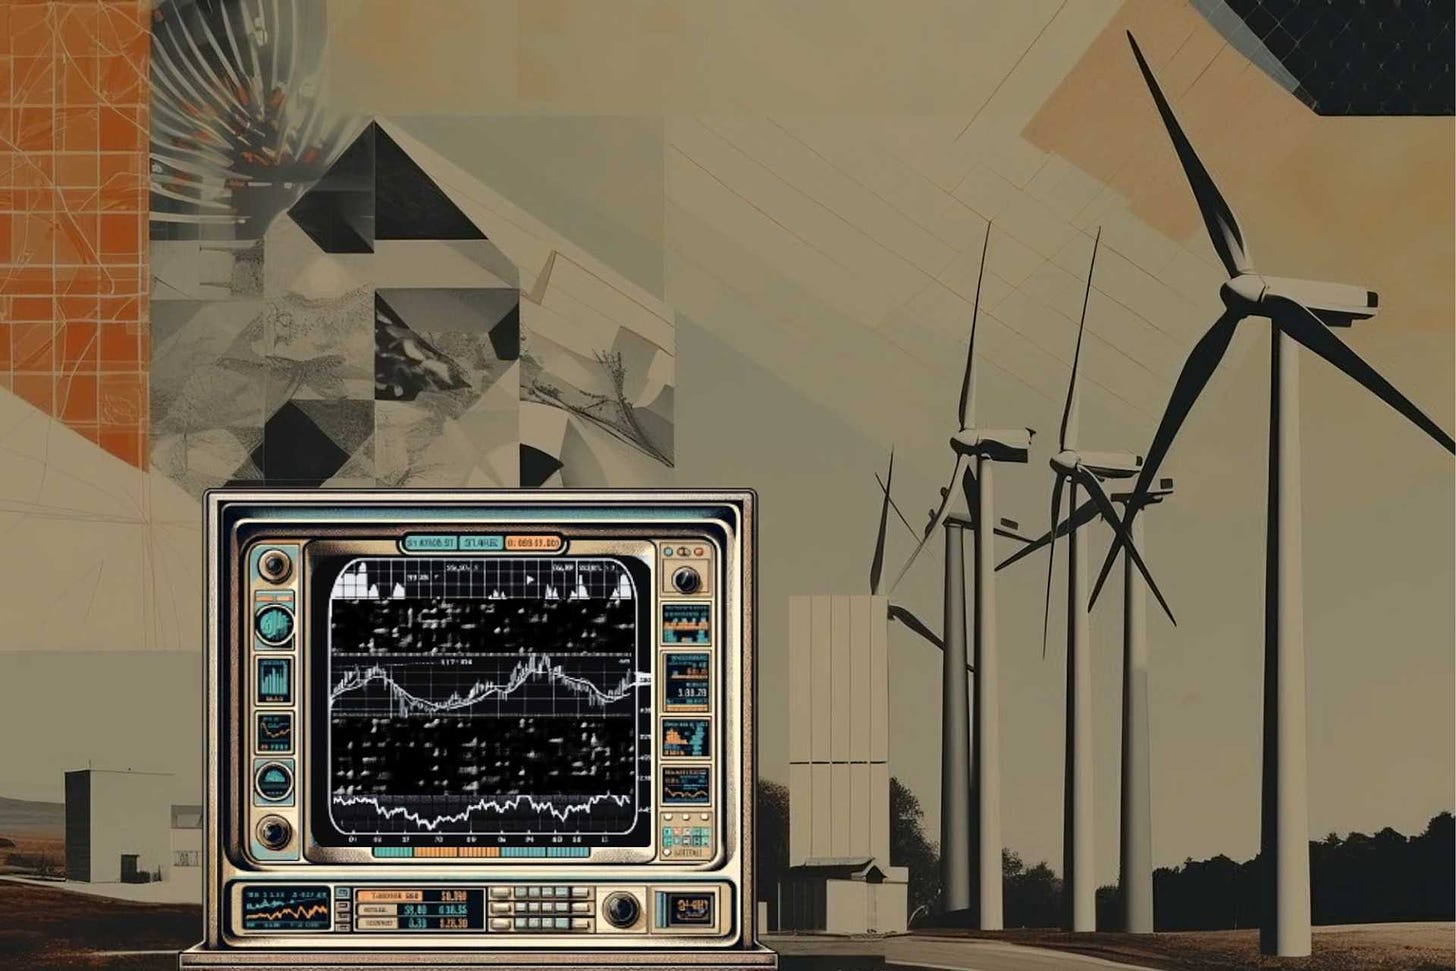 Art of computer juxtaposed over image of climate technology